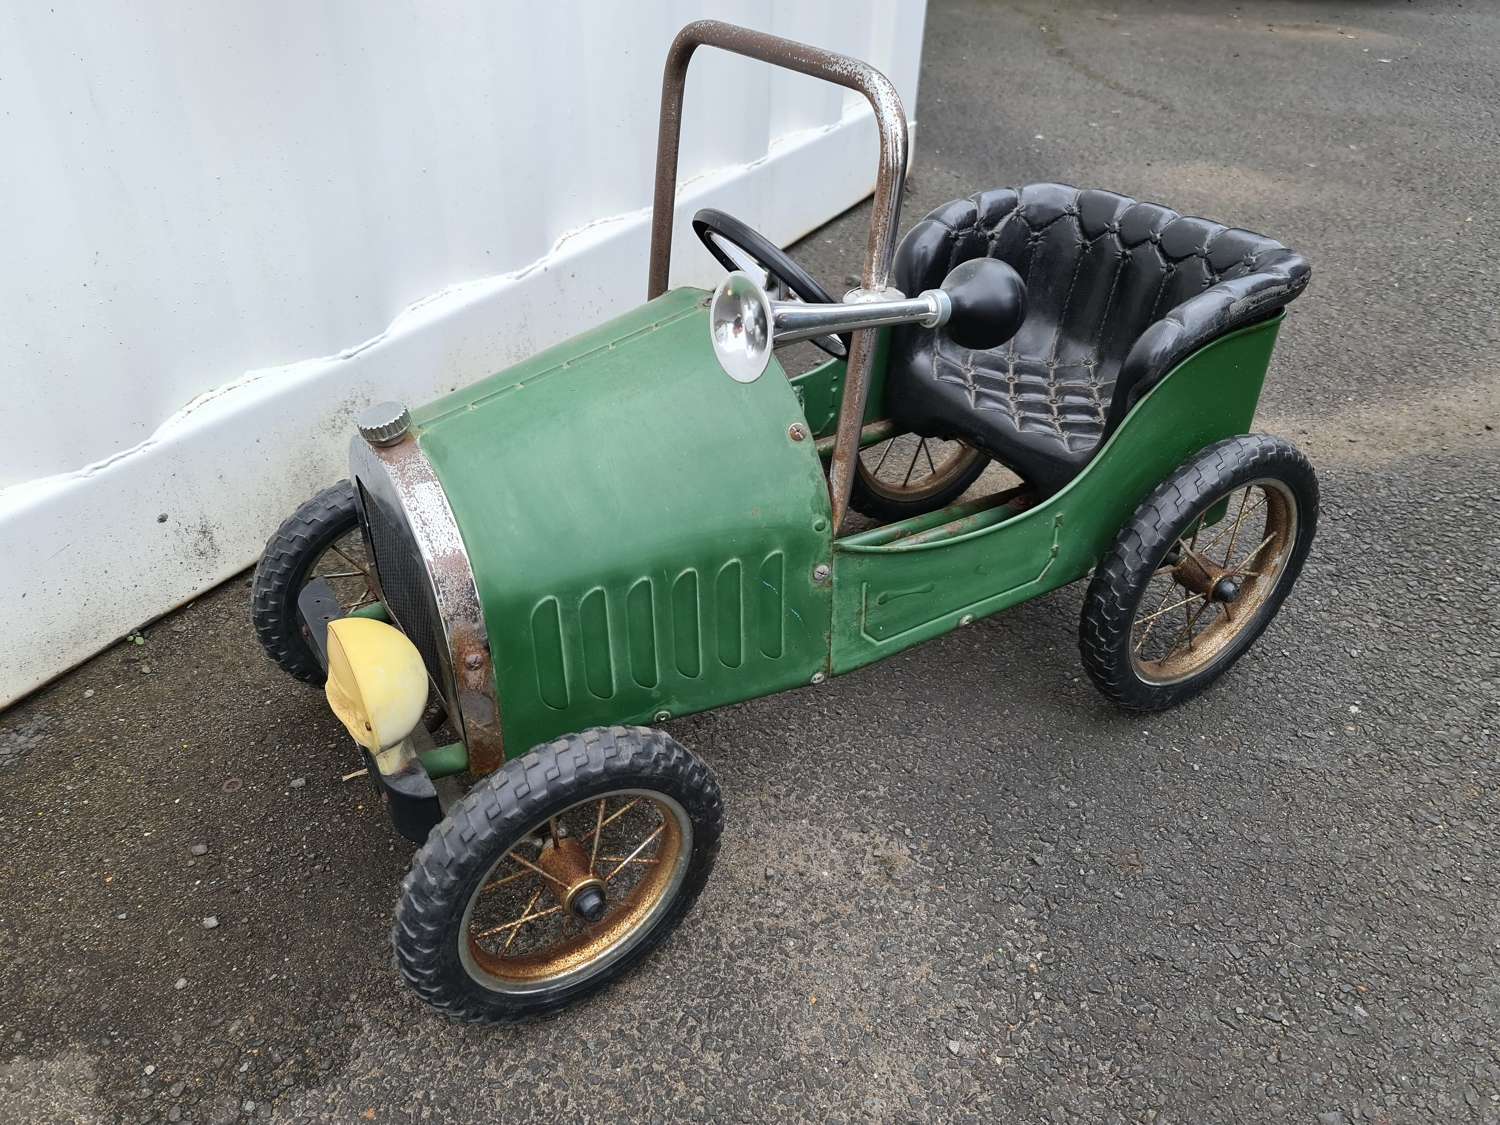 Early 20th Century Pedal Car